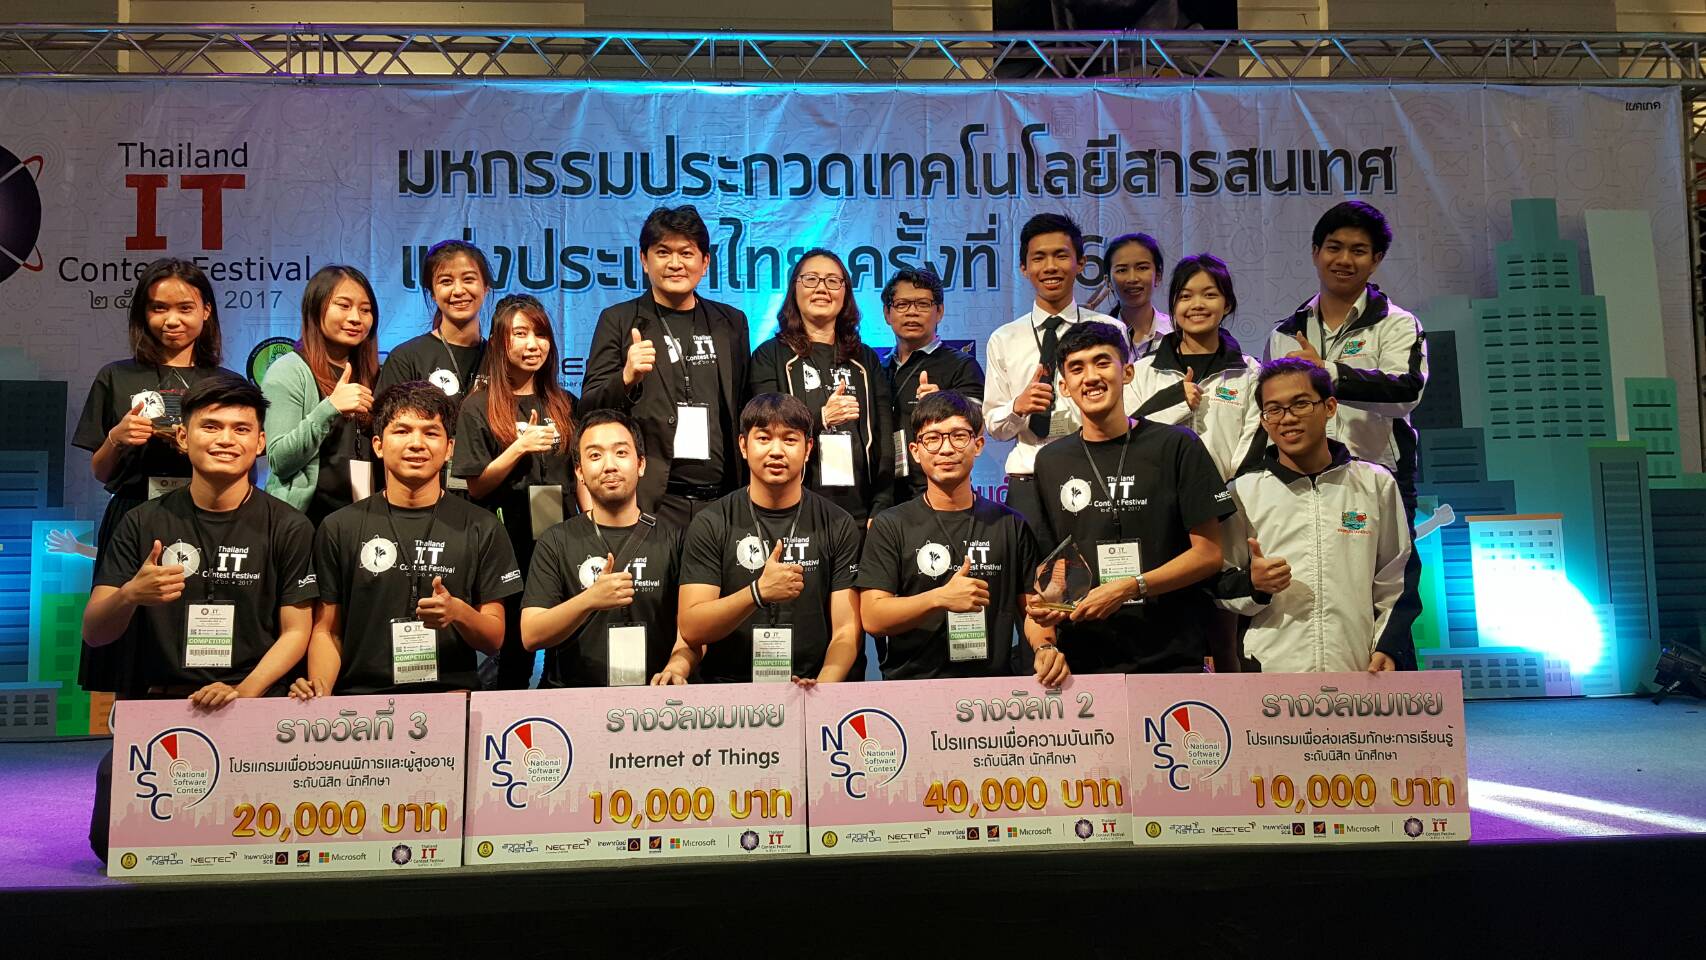 KKU Science students win 4 NSC 2017 prizes held at Fashion Island